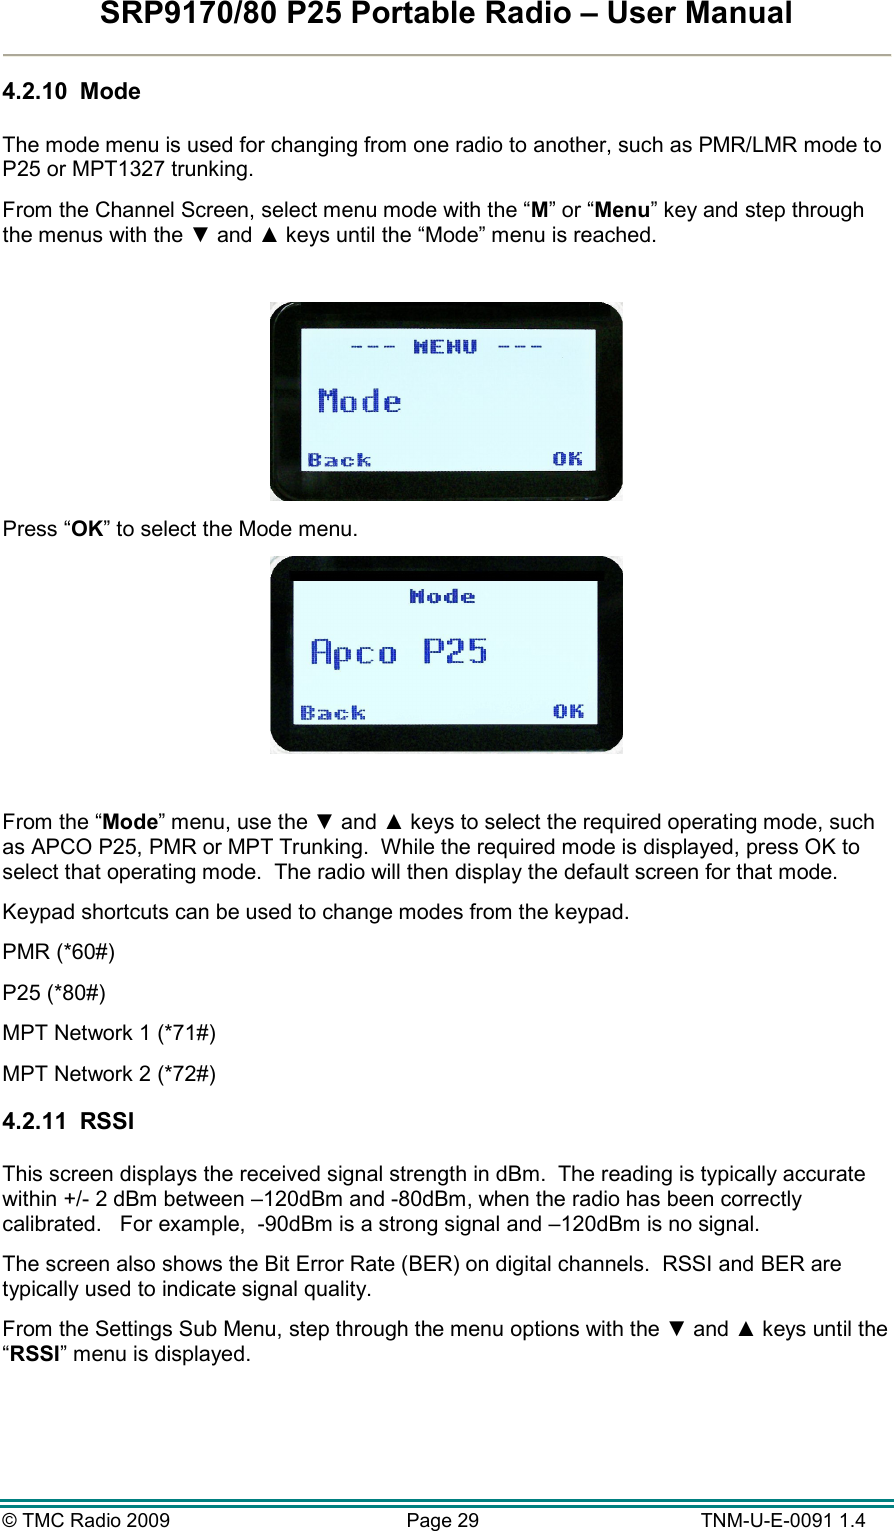 SRP9170/80 P25 Portable Radio – User Manual  © TMC Radio 2009  Page 29   TNM-U-E-0091 1.4 4.2.10  Mode  The mode menu is used for changing from one radio to another, such as PMR/LMR mode to P25 or MPT1327 trunking. From the Channel Screen, select menu mode with the “M” or “Menu” key and step through the menus with the ▼ and ▲ keys until the “Mode” menu is reached.   Press “OK” to select the Mode menu.   From the “Mode” menu, use the ▼ and ▲ keys to select the required operating mode, such as APCO P25, PMR or MPT Trunking.  While the required mode is displayed, press OK to select that operating mode.  The radio will then display the default screen for that mode. Keypad shortcuts can be used to change modes from the keypad.   PMR (*60#) P25 (*80#) MPT Network 1 (*71#) MPT Network 2 (*72#) 4.2.11  RSSI  This screen displays the received signal strength in dBm.  The reading is typically accurate within +/- 2 dBm between –120dBm and -80dBm, when the radio has been correctly calibrated.   For example,  -90dBm is a strong signal and –120dBm is no signal. The screen also shows the Bit Error Rate (BER) on digital channels.  RSSI and BER are typically used to indicate signal quality. From the Settings Sub Menu, step through the menu options with the ▼ and ▲ keys until the “RSSI” menu is displayed.  